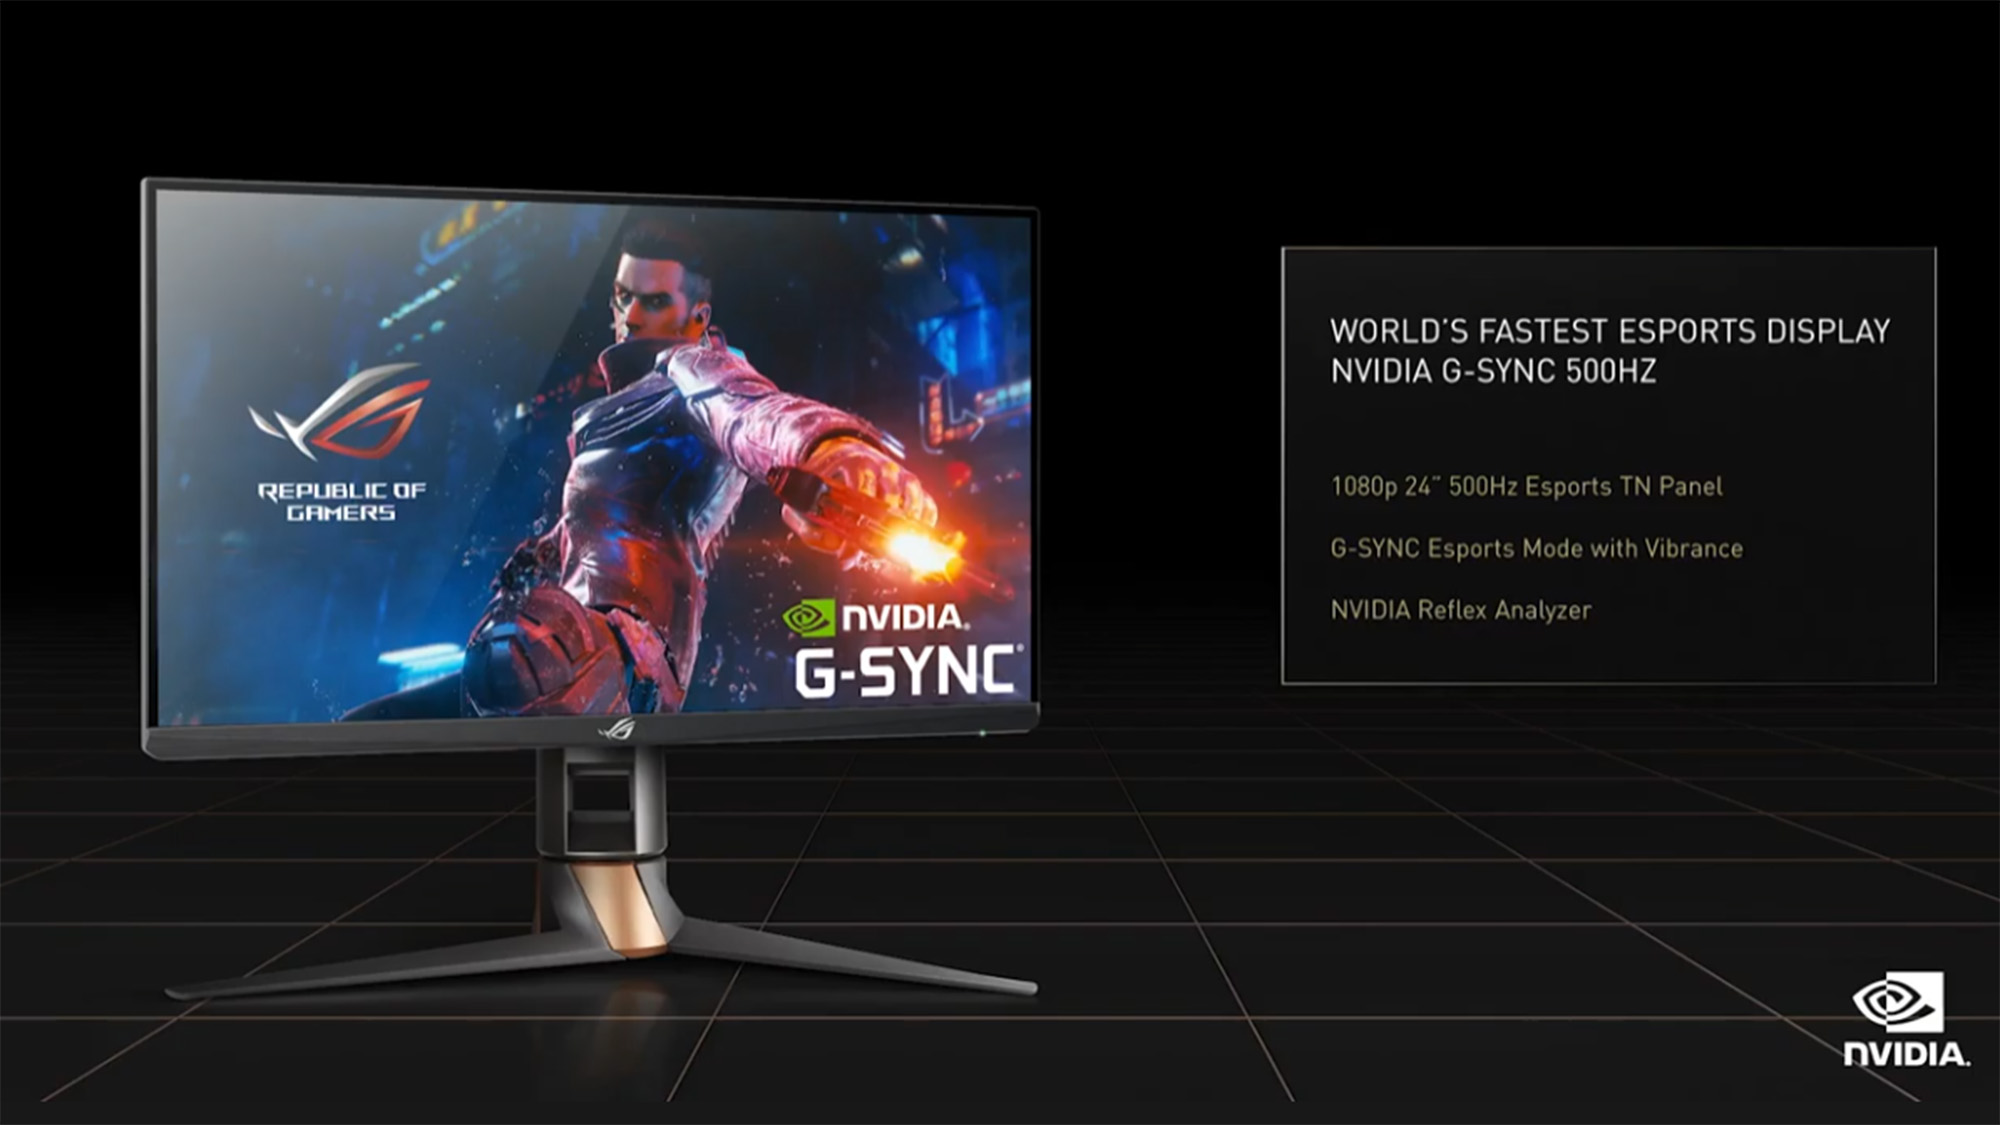 An Nvidia gaming monitor with 500Hz refresh